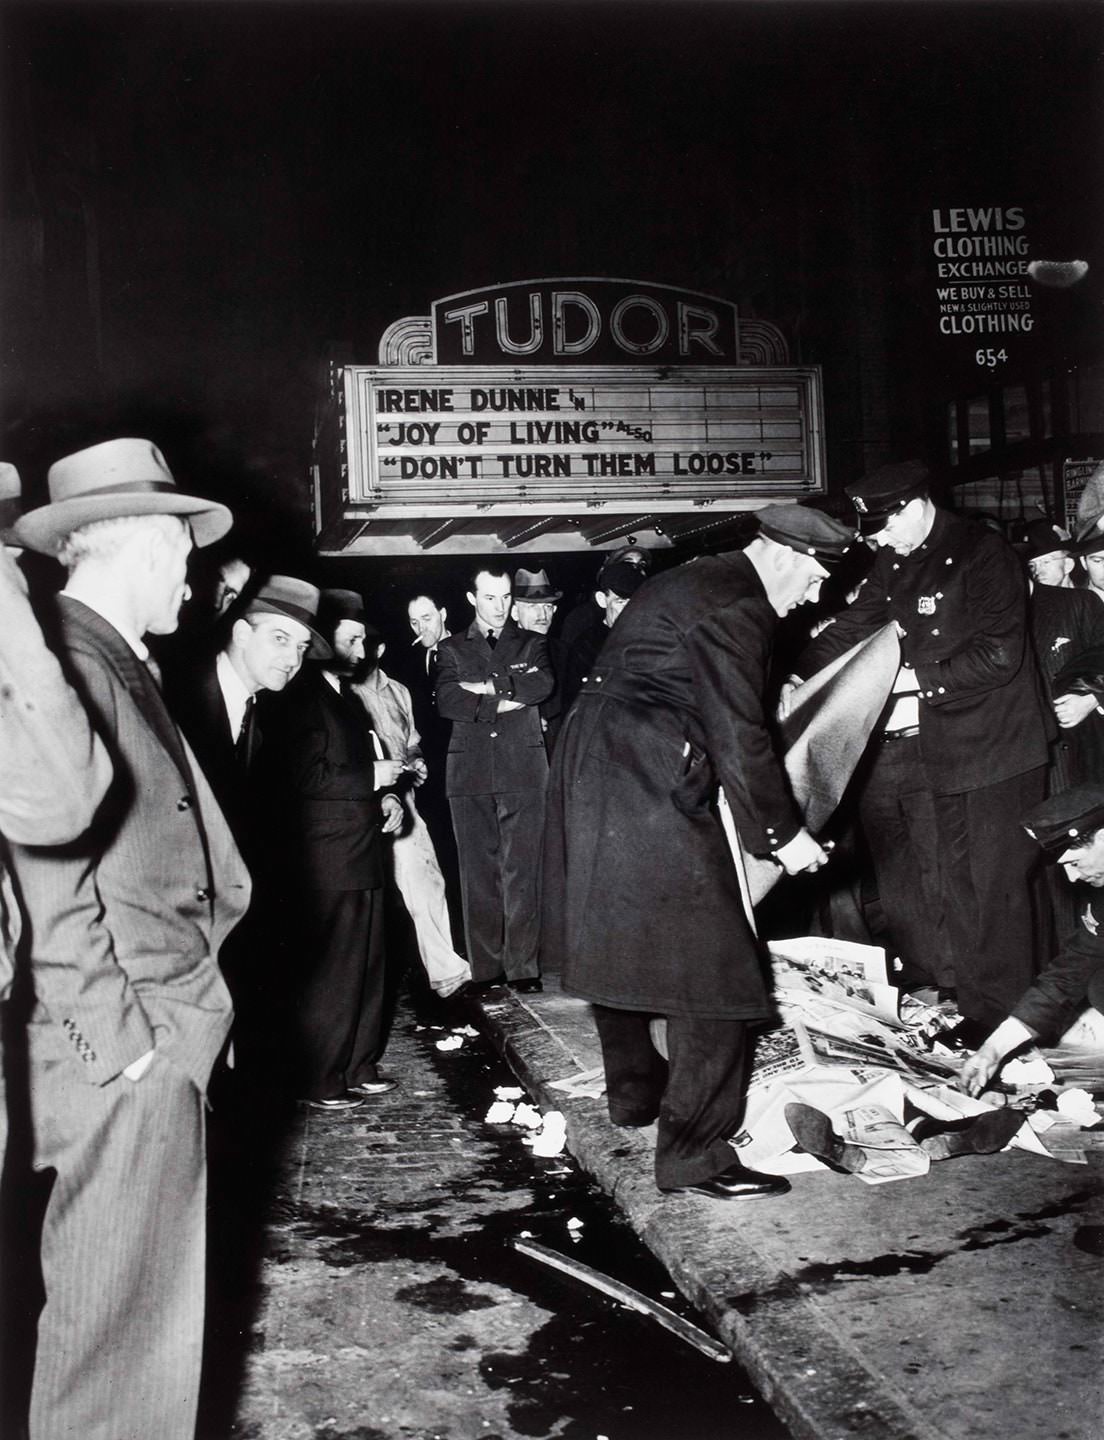 A Photographic History of New York City from 1930s-1950s through the Lens of Weegee